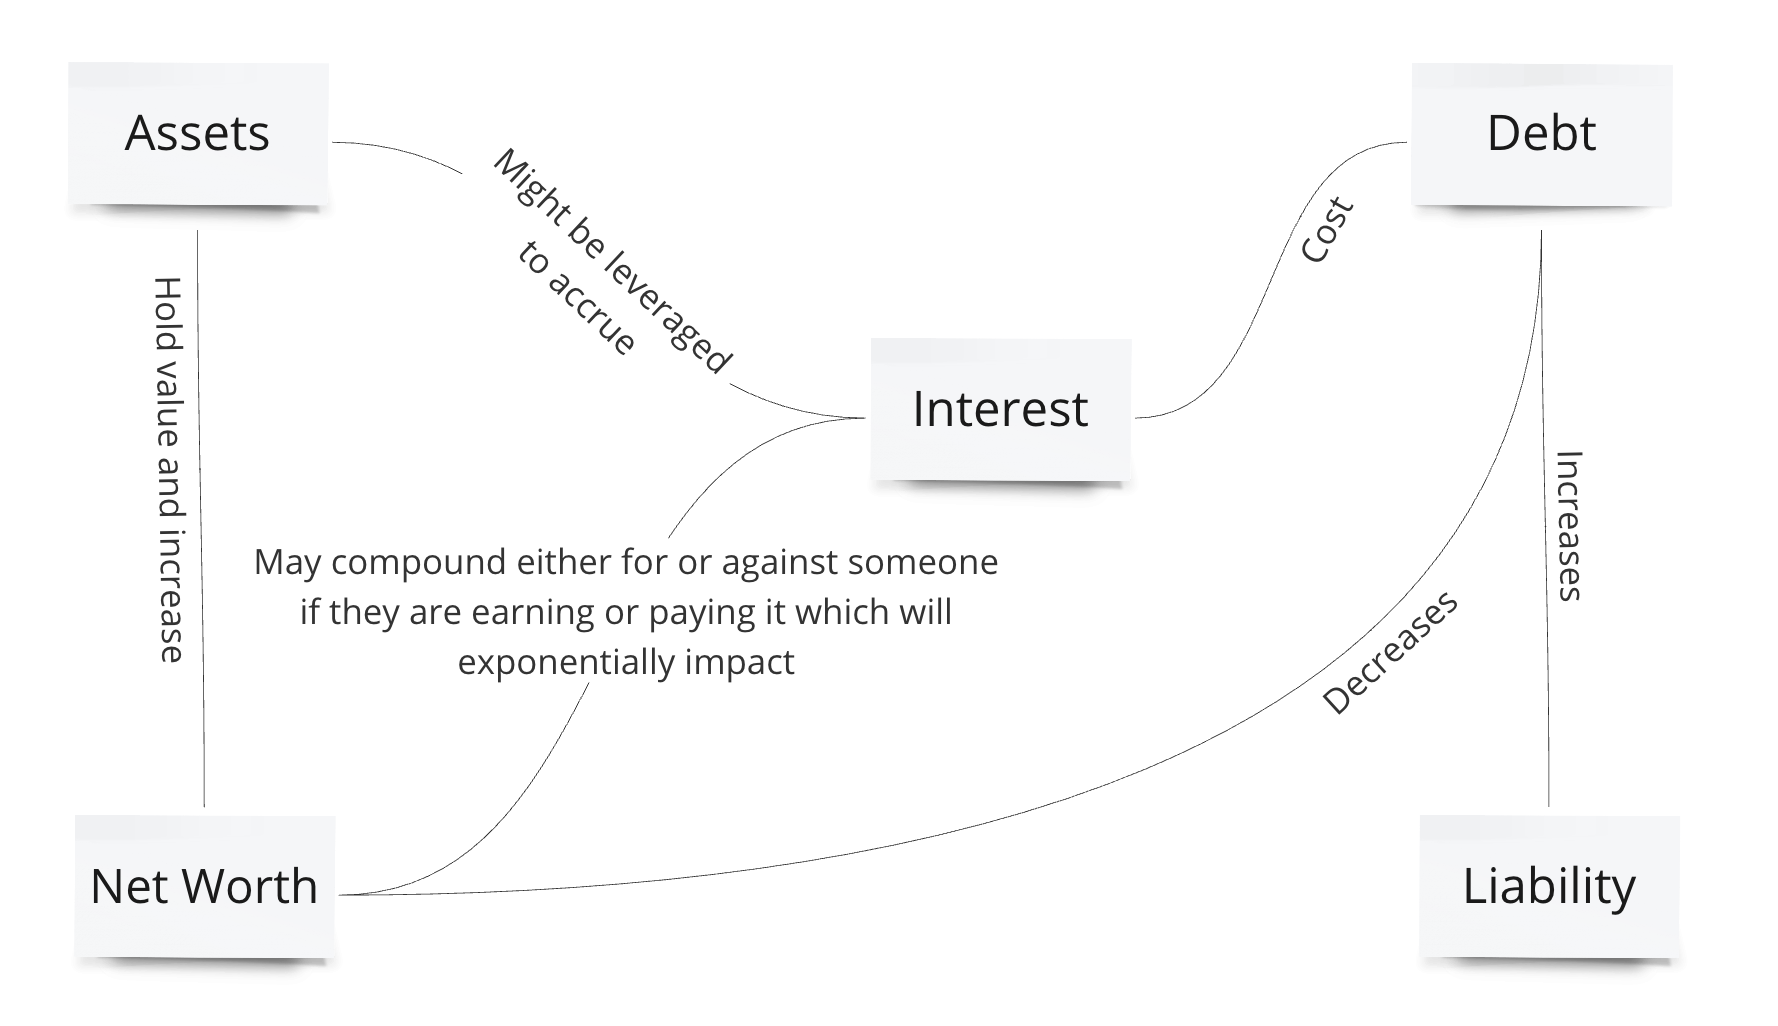 Diagram of a network where the following nodes are connected with text between: "Assets", "Interest", "Debt", "Net Worth", "Liability"